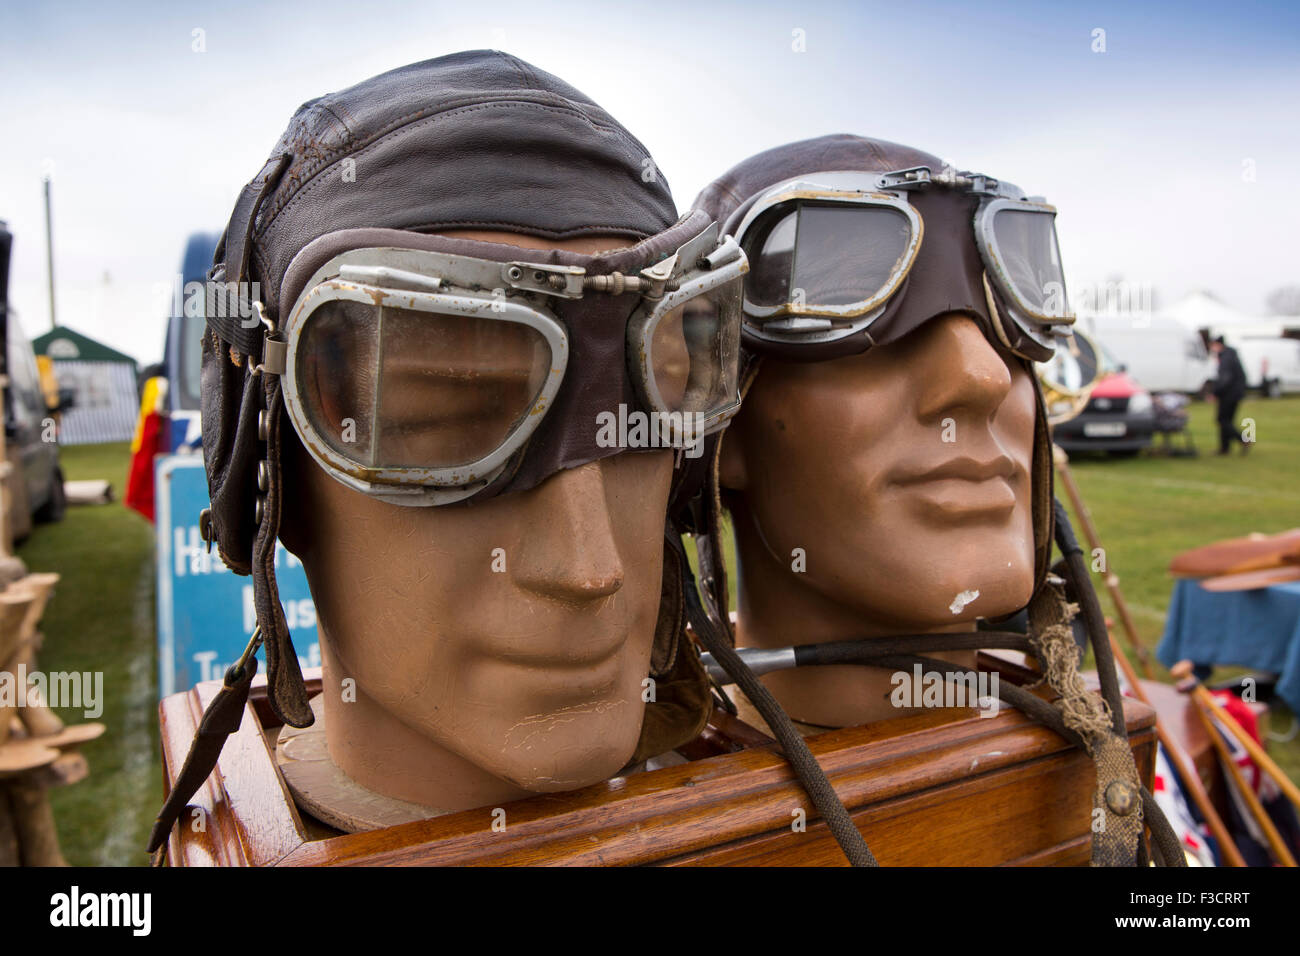 UK, England, Lincolnshire, Lincoln, Antiques Fair, dummy heads wearing leather flying helmets and goggles Stock Photo